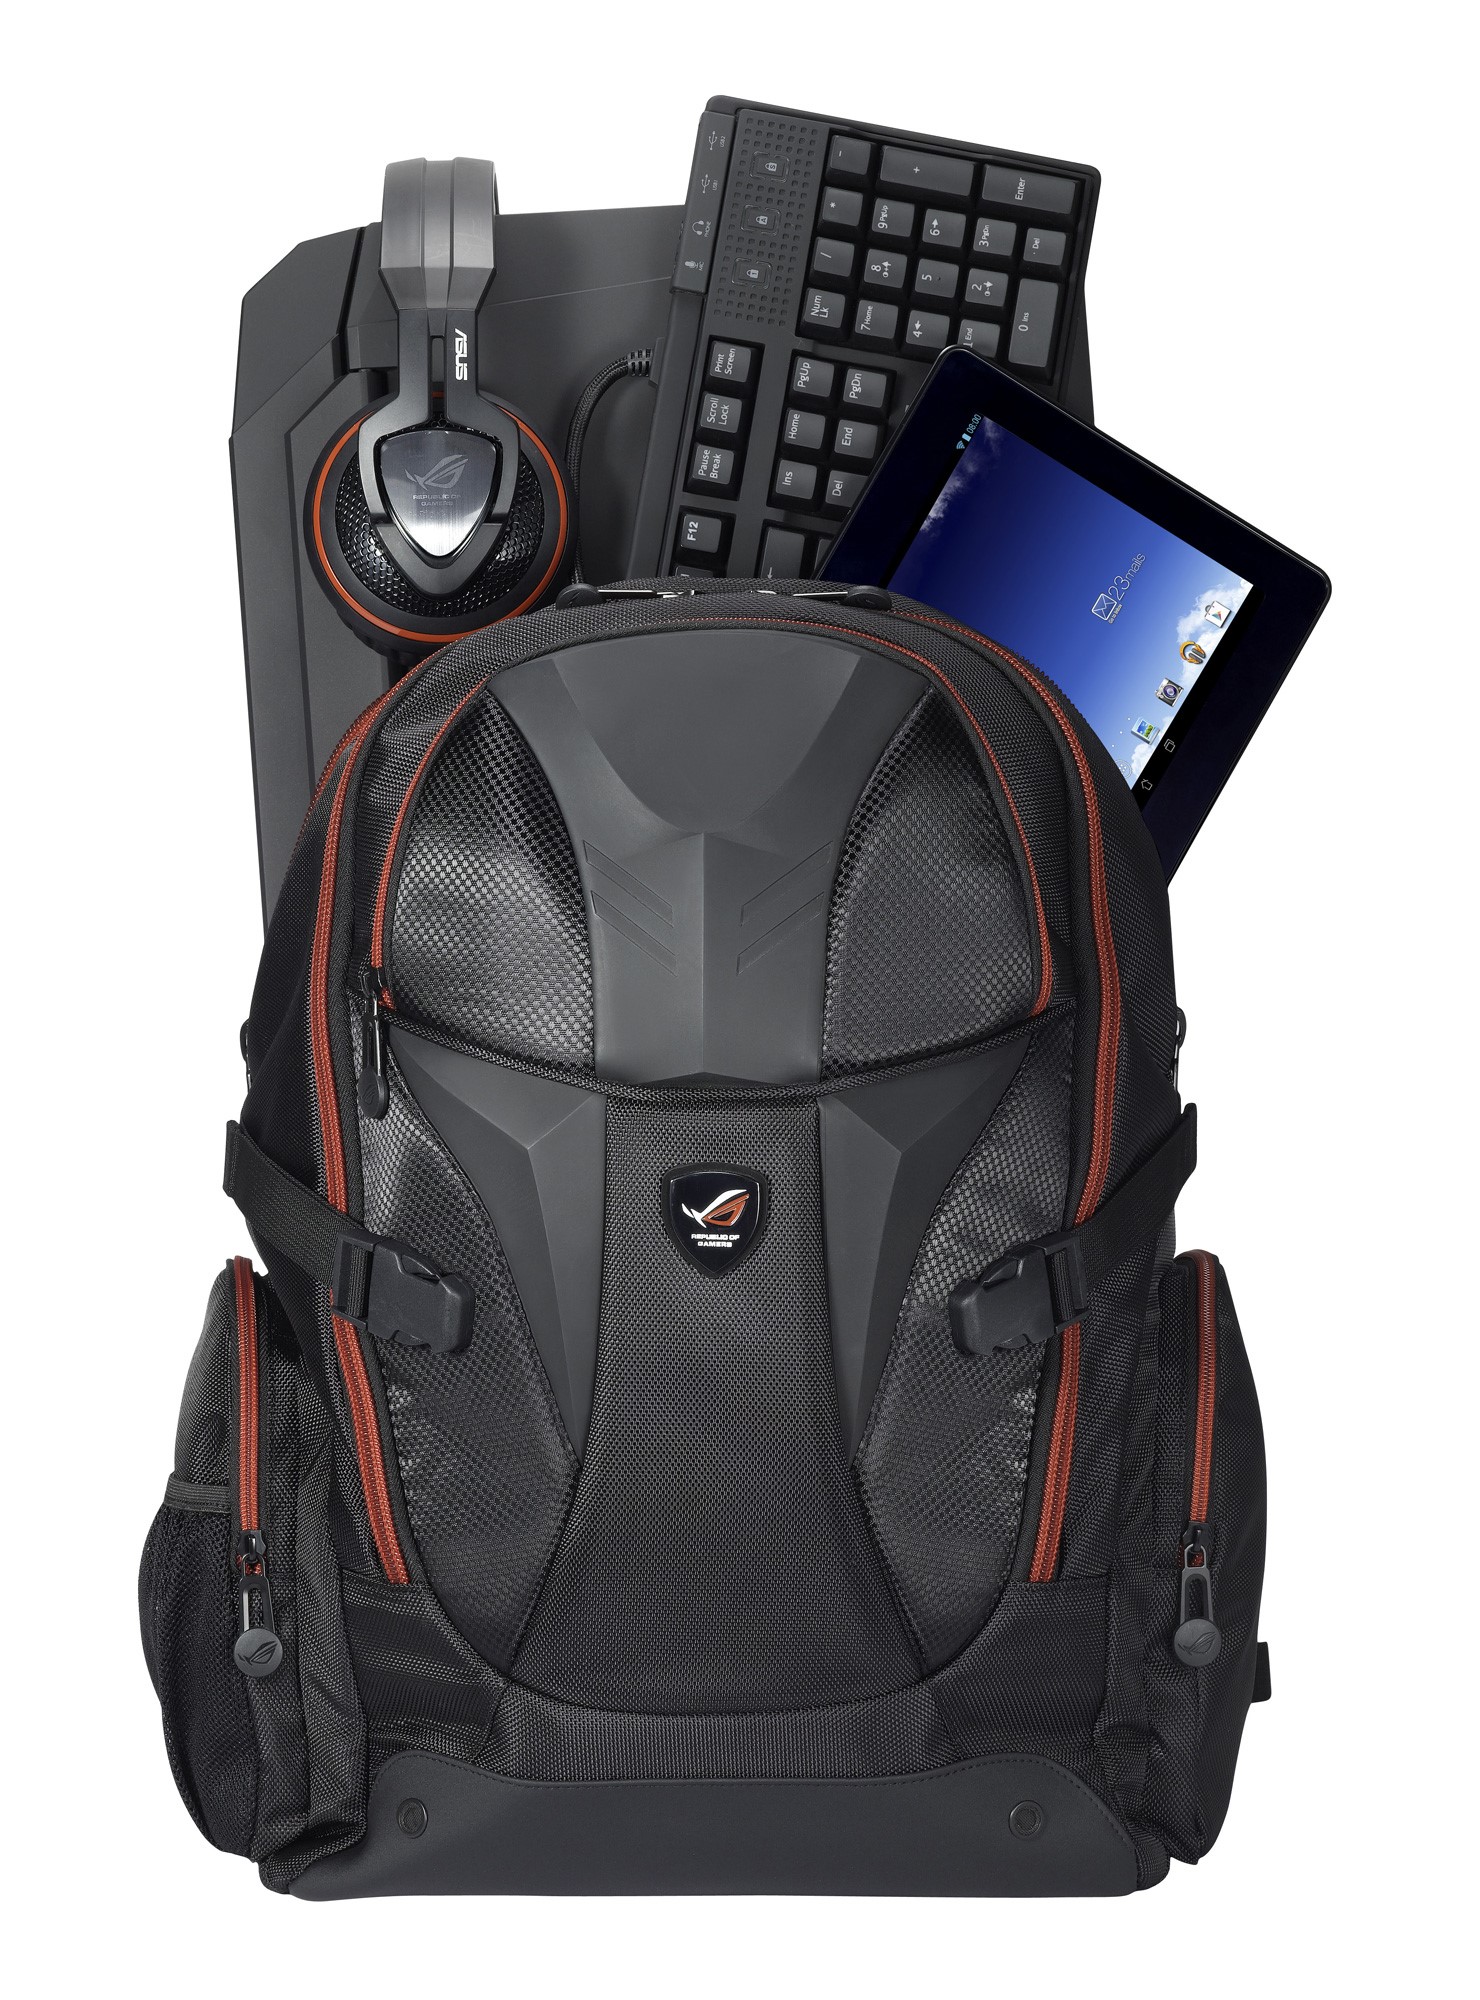 Рис.2. ASUS ROG NOMAD Backpack 17